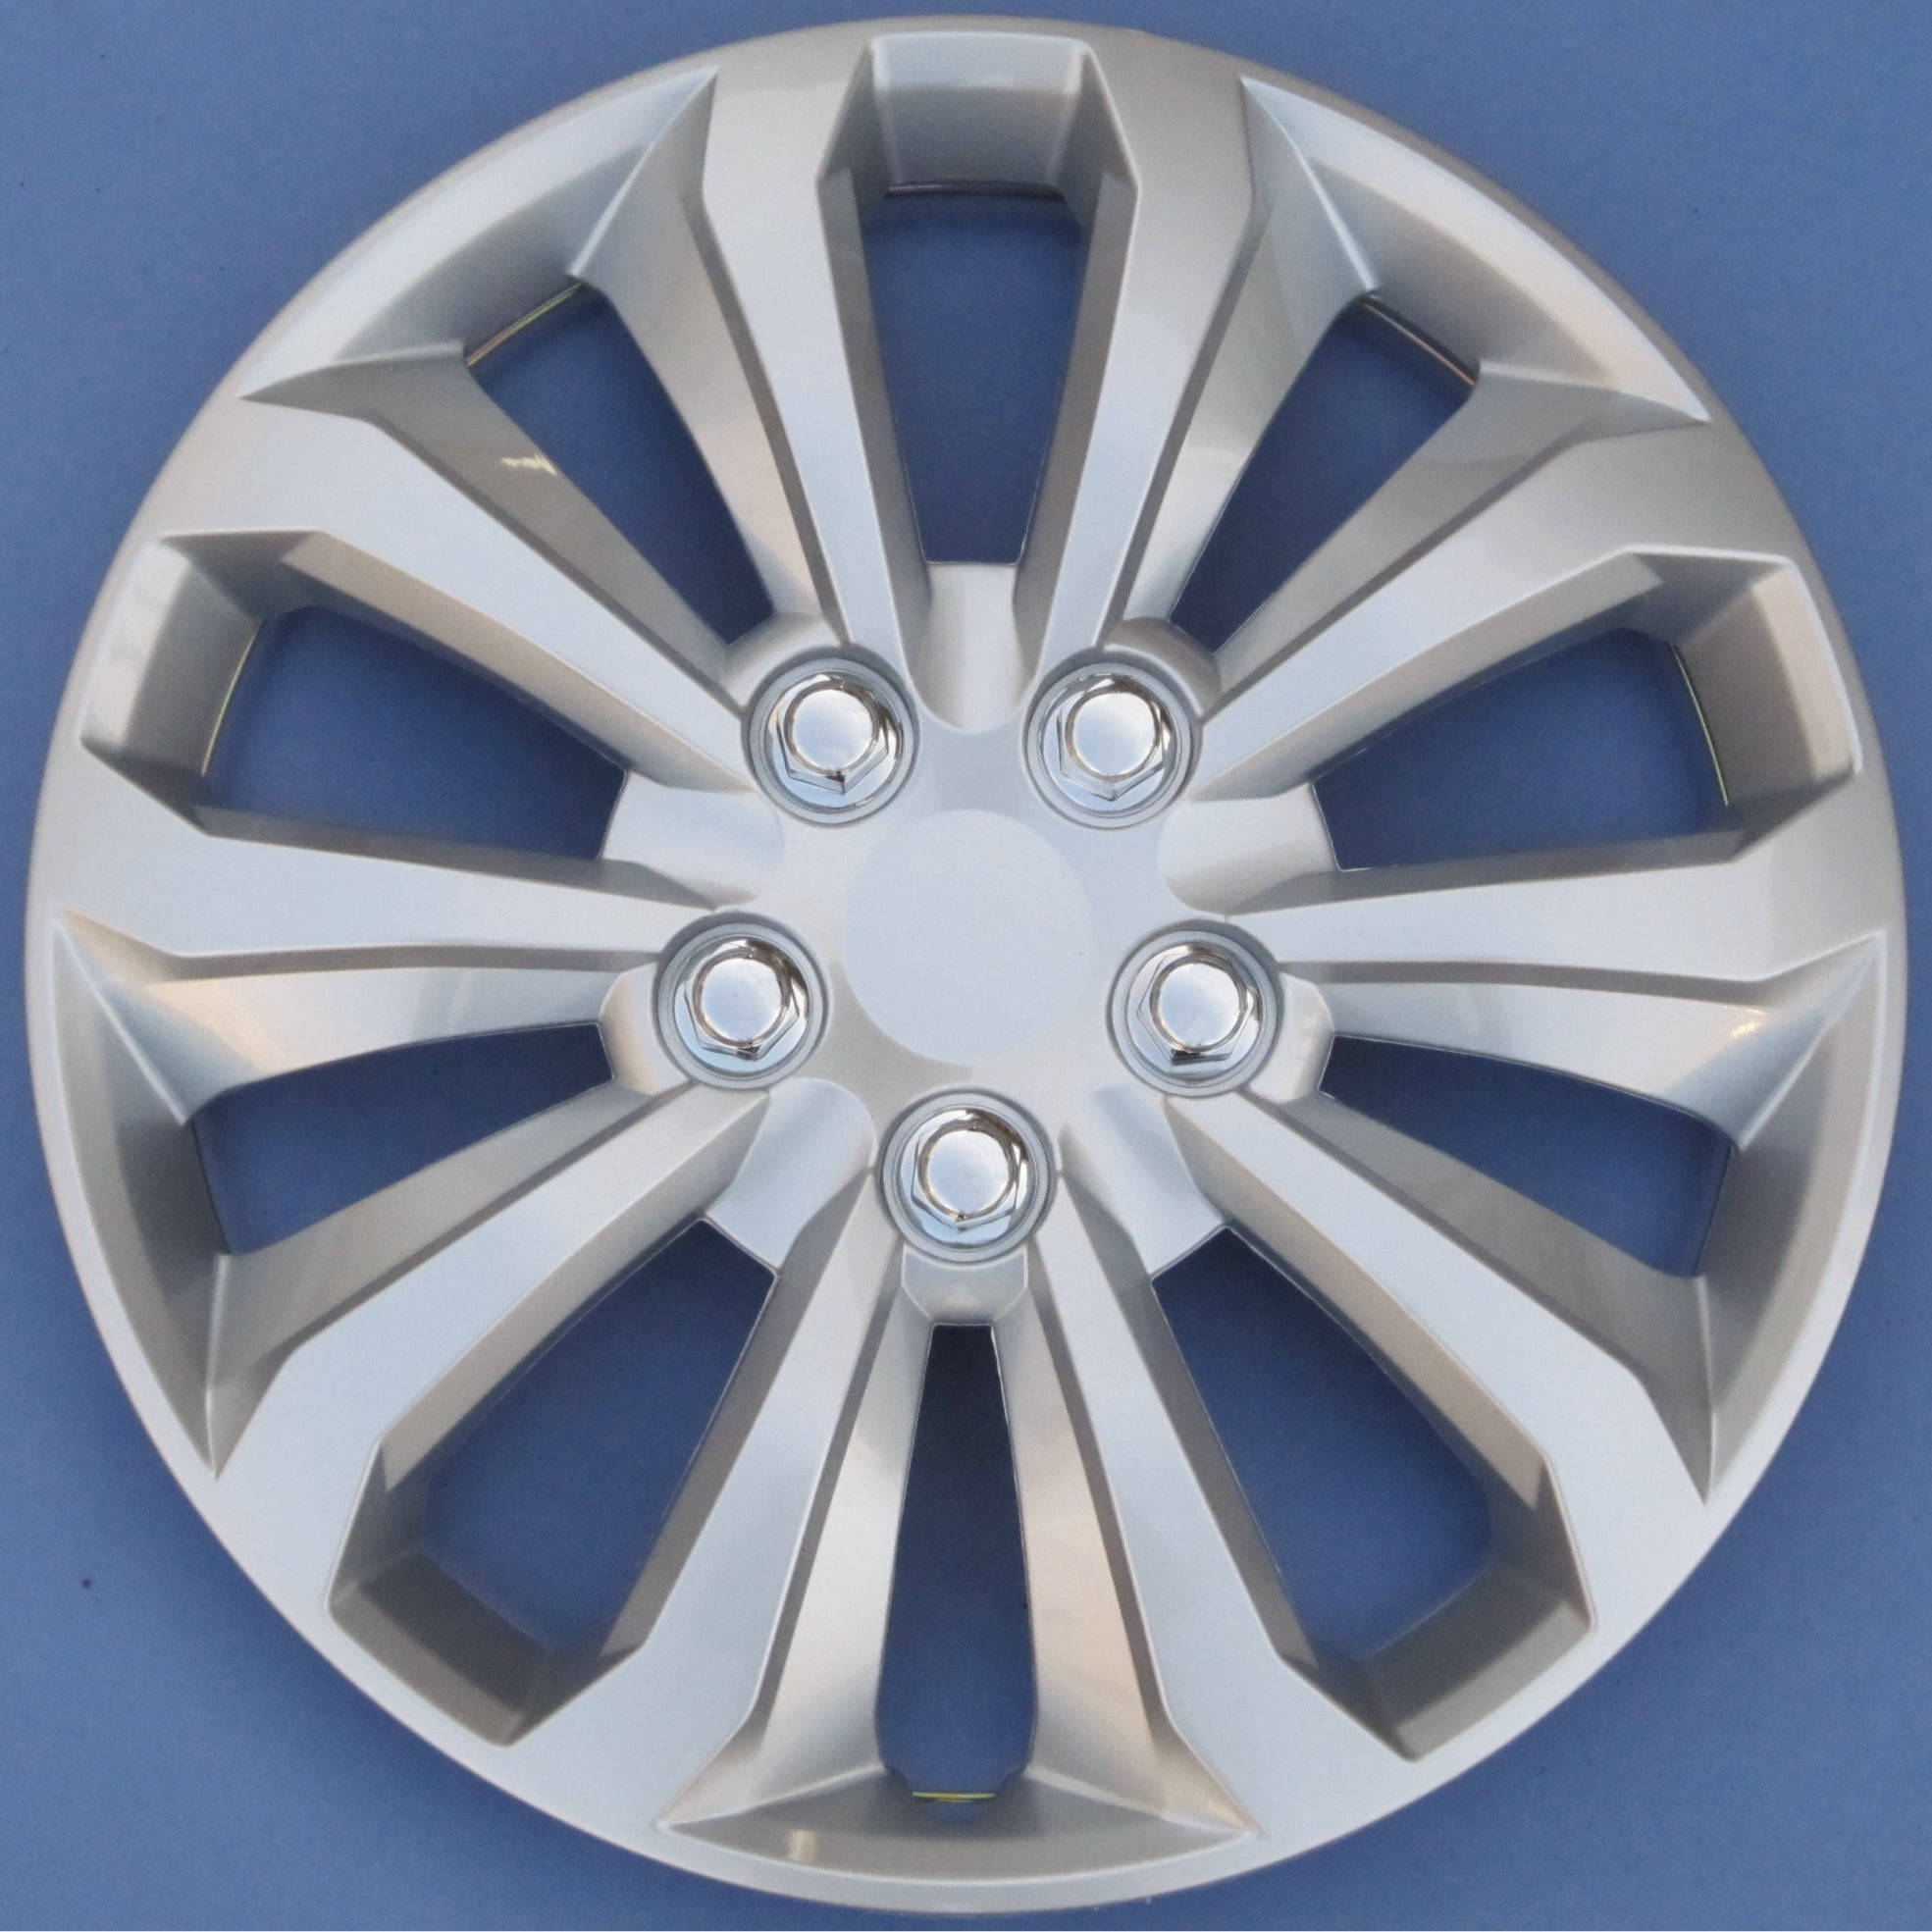 coming soon Auto Drive 14-in Wheel Cover, KT1061-14S/L